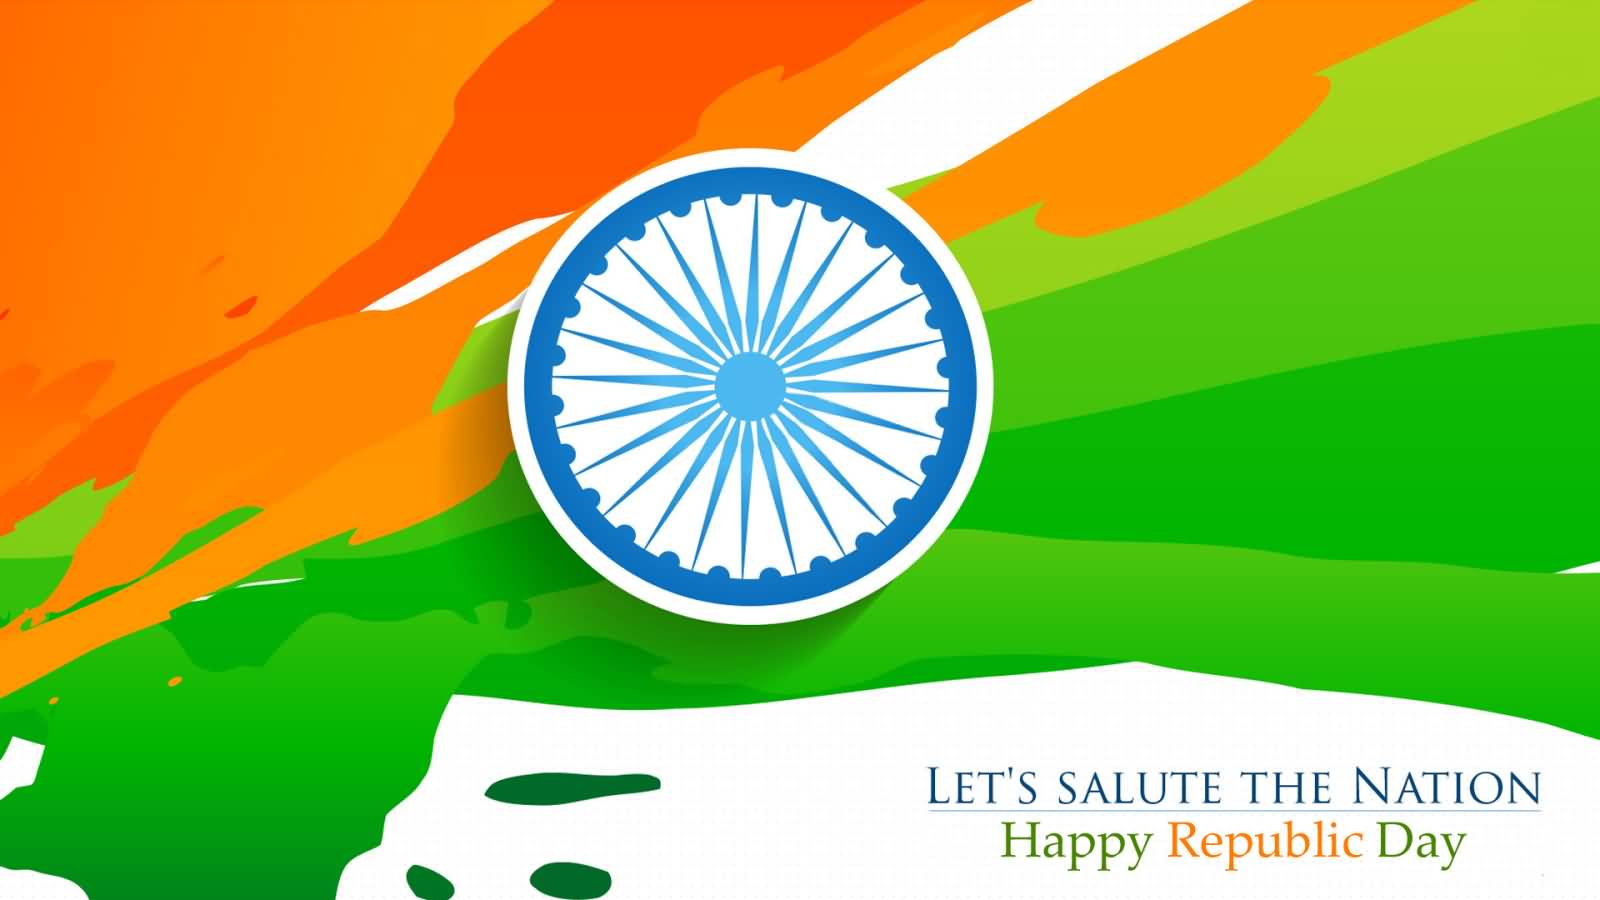 Let's Salute The Nation Happy Republic Day